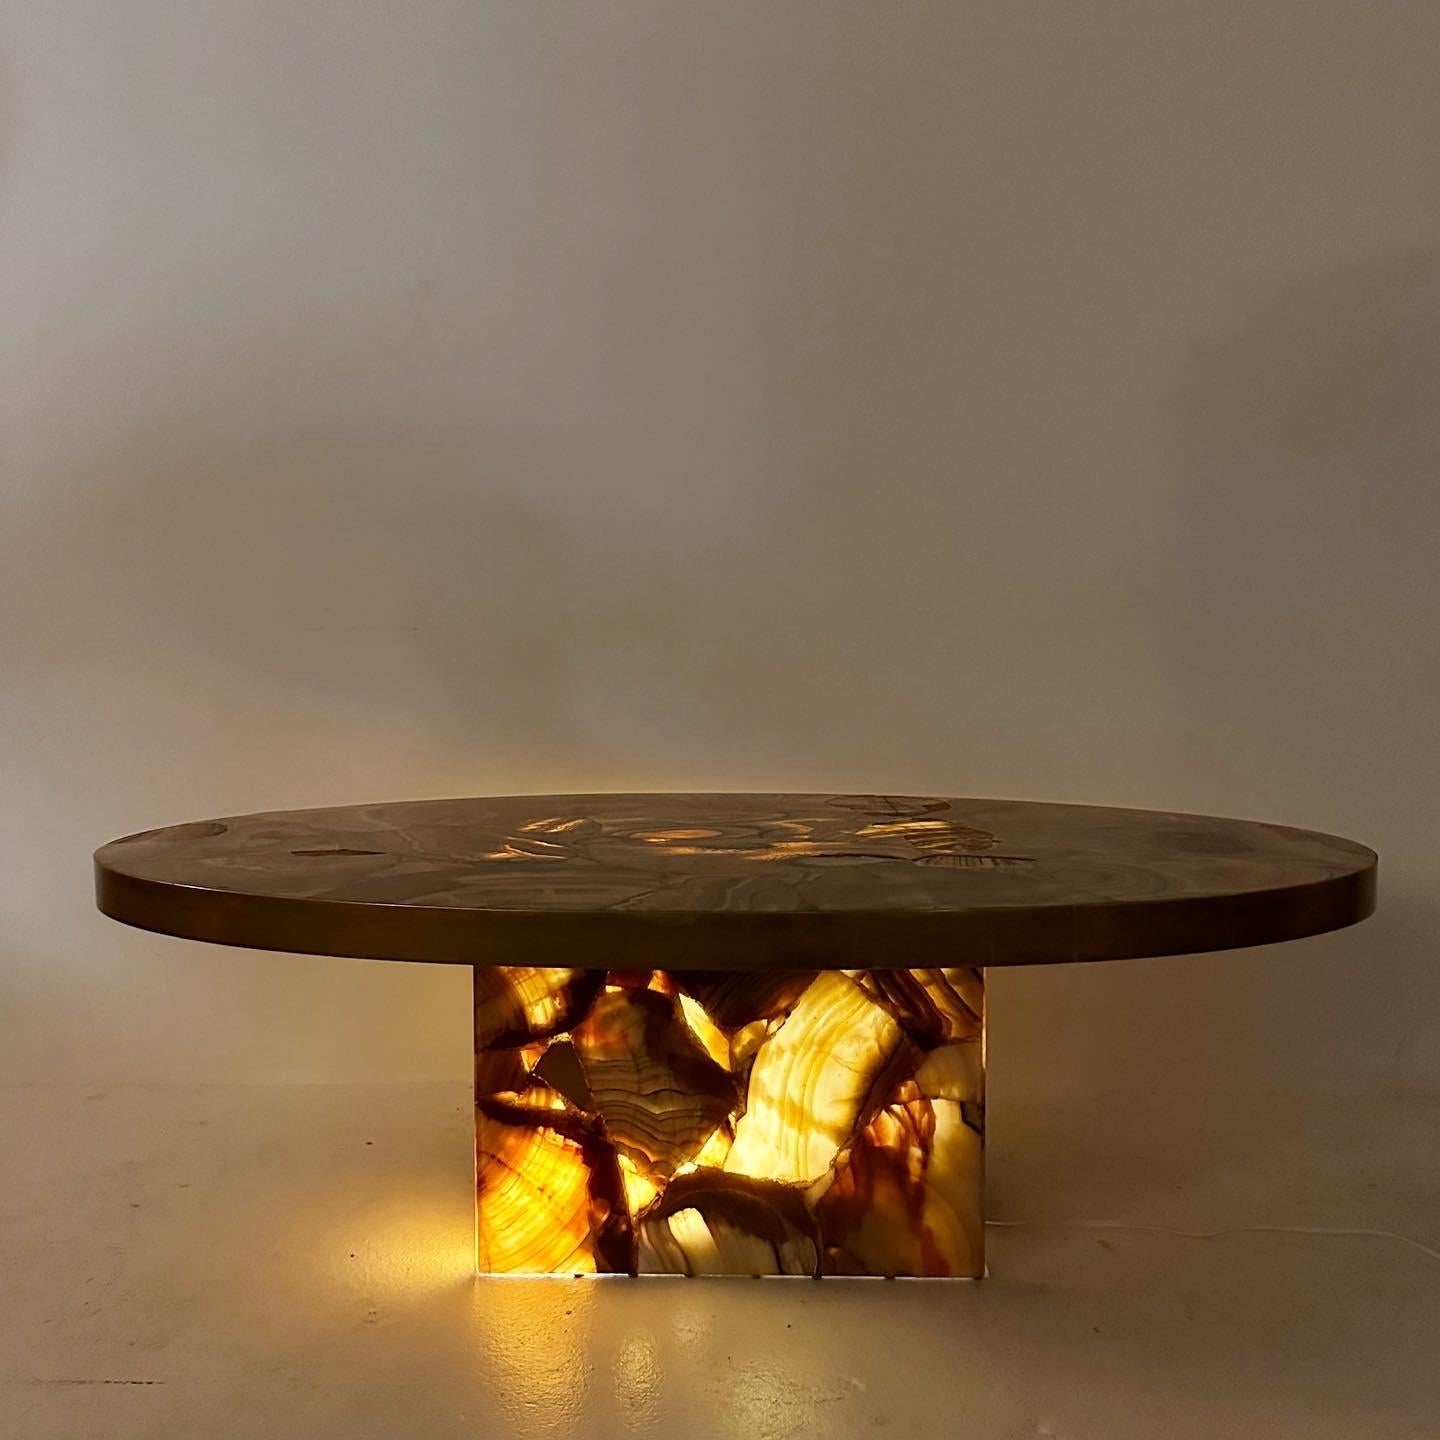 Brass rimmed oval alabaster coffee table (often marked as onyx). Made in Acapulco in the 1970s. The stone is translucent, so the table can be illuminated.